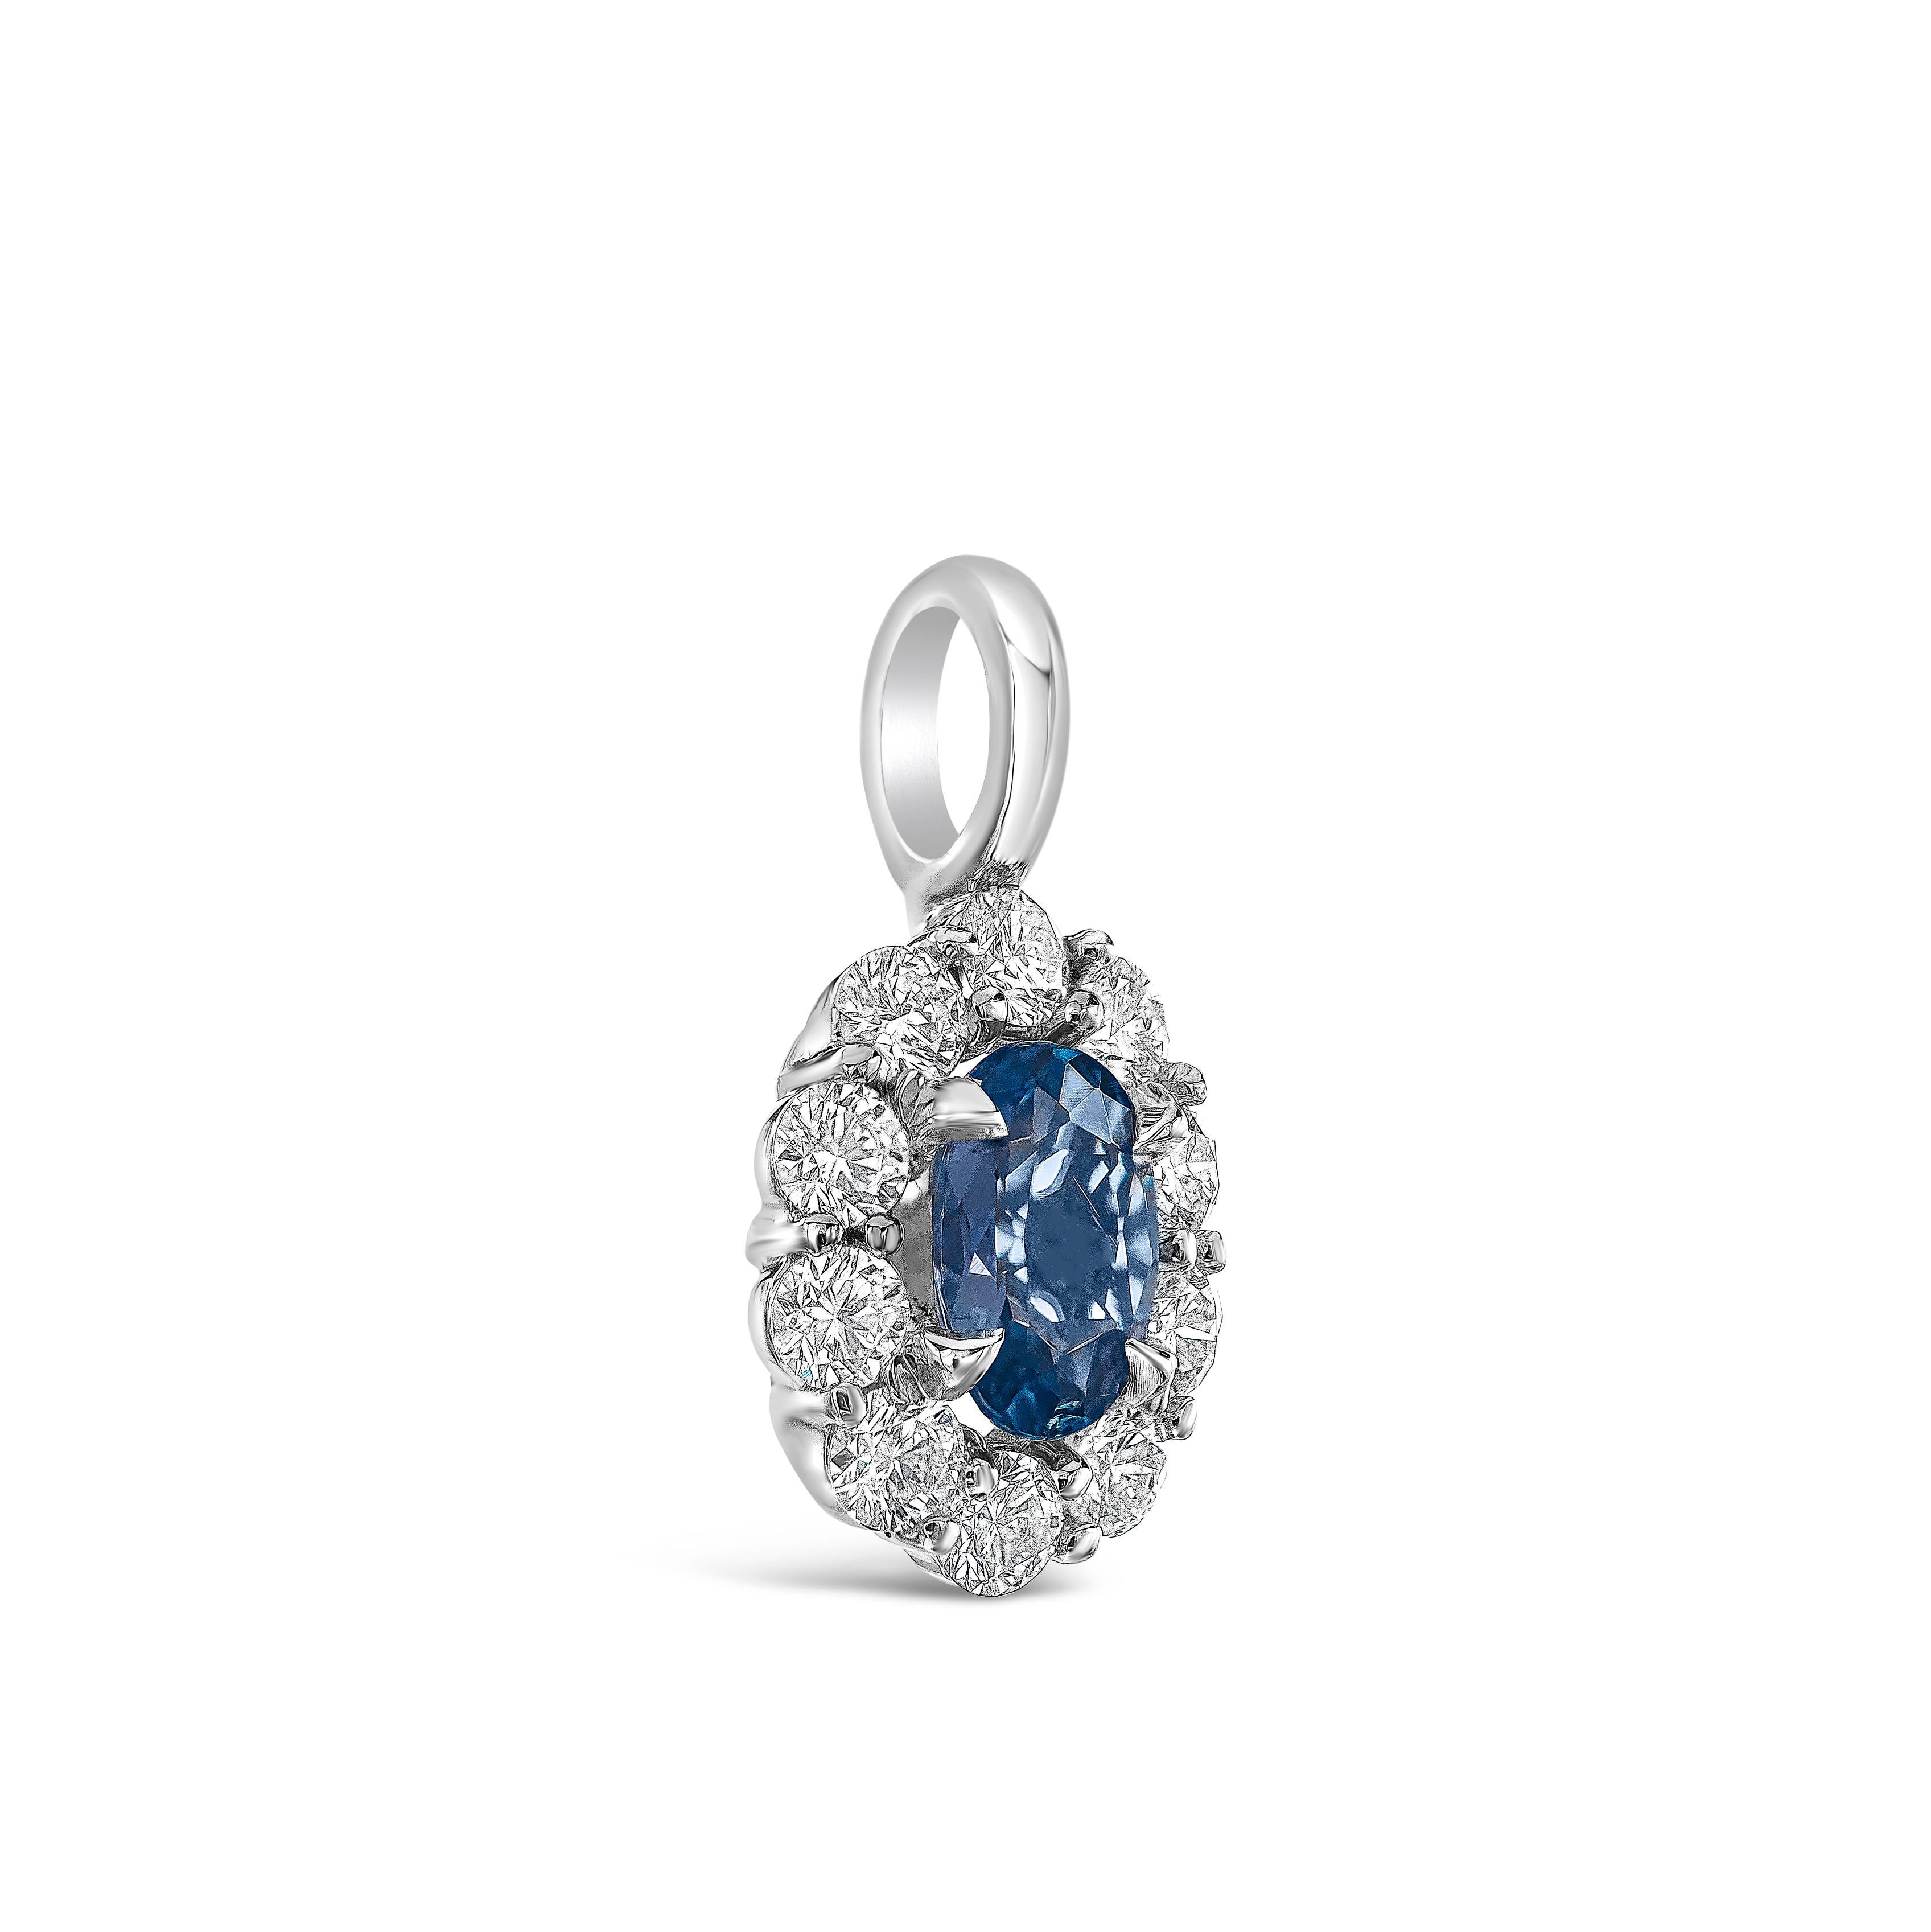 A classic and versatile pendant necklace showcasing a 0.38 carat oval cut blue sapphire, surrounded by a single row of round brilliant diamonds weighing 0.35 carats total. Set in 18K white gold. Suspended on an 18 inch white gold chain. 

Roman